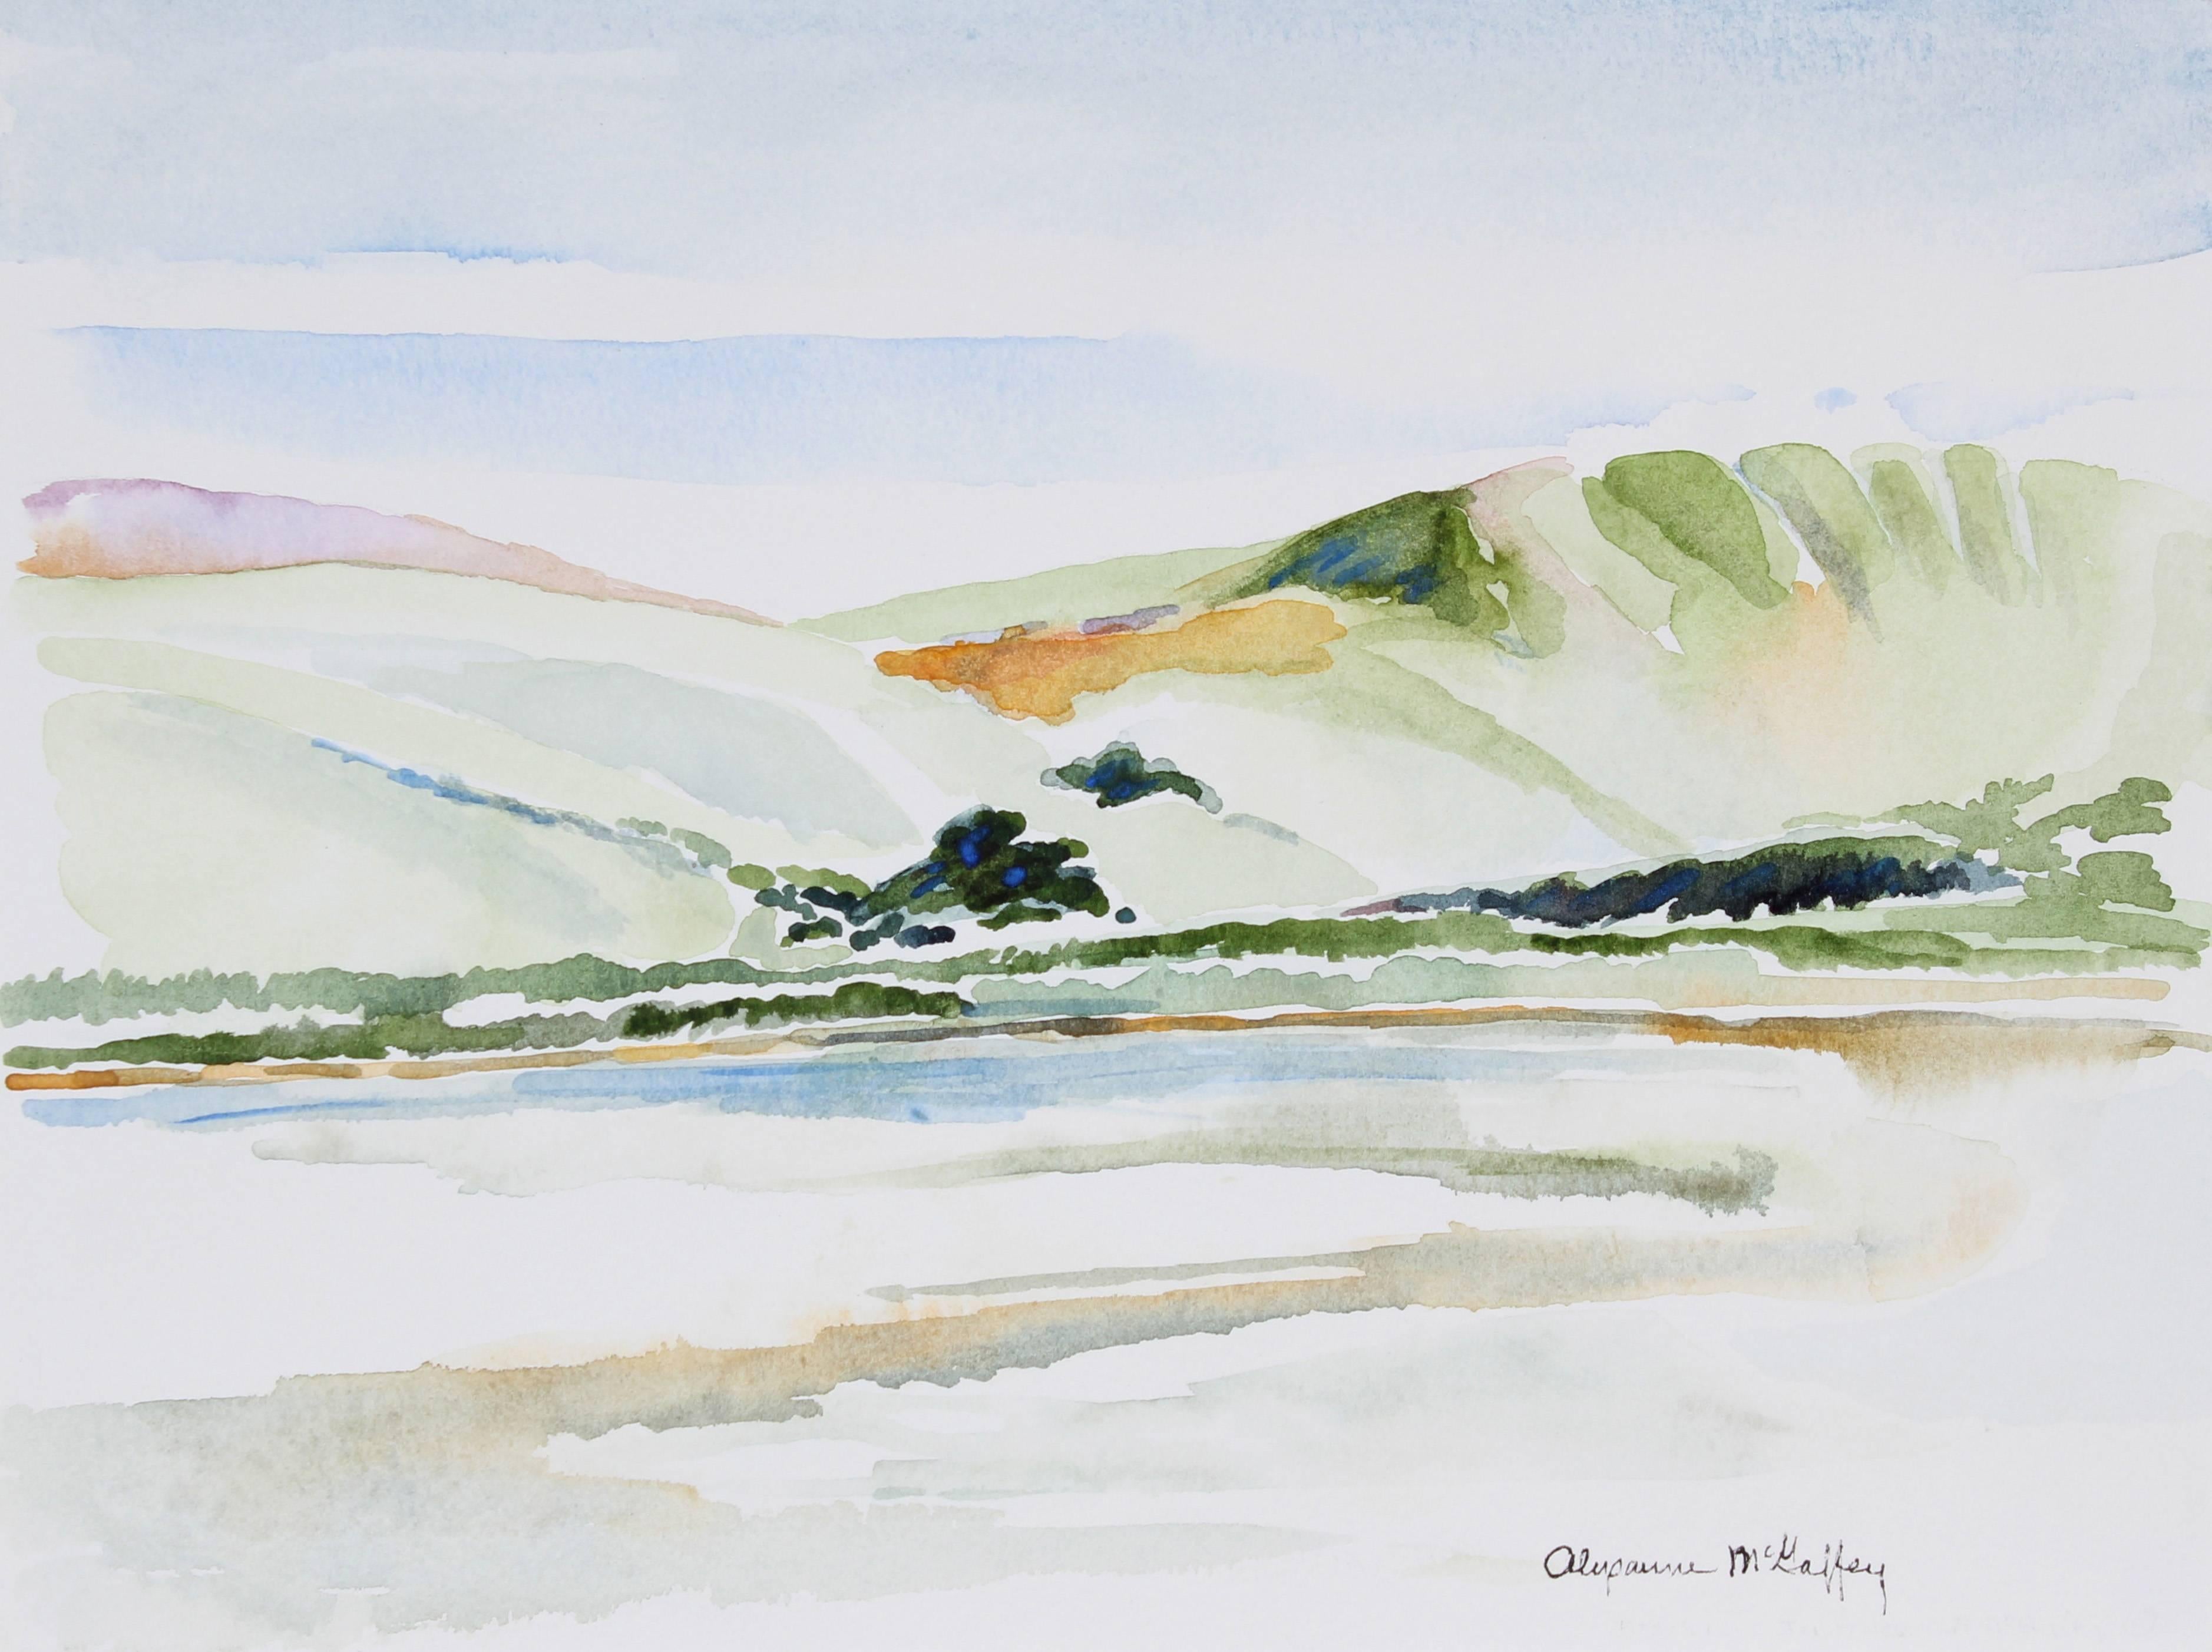 Alysanne McGaffey Landscape Art - "Looking at Tomales Bay from Inverness, CA" Bay Area Landscape Watercolor